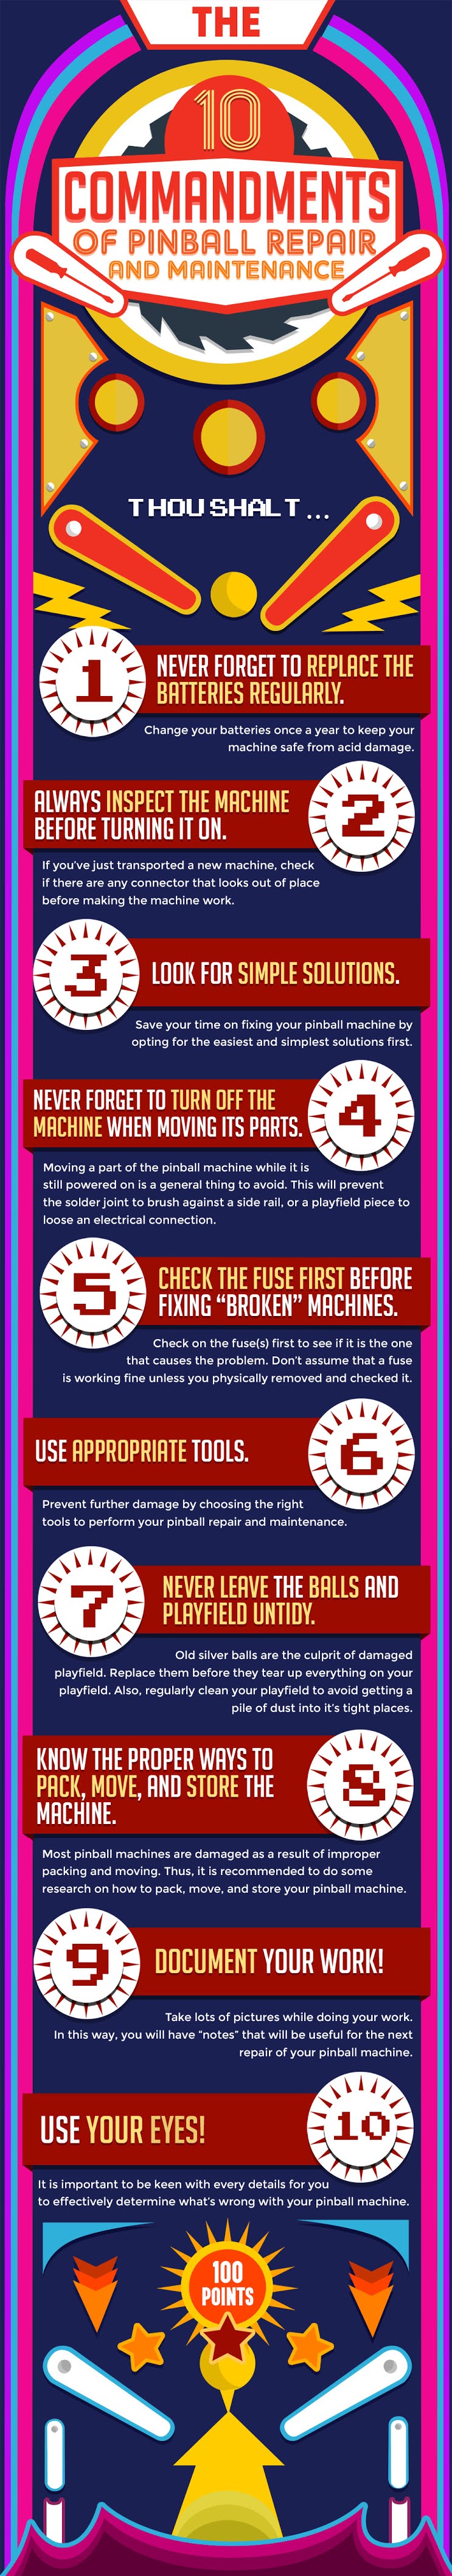 The 10 Commandments of Pinball Repair and Maintenance #infographic